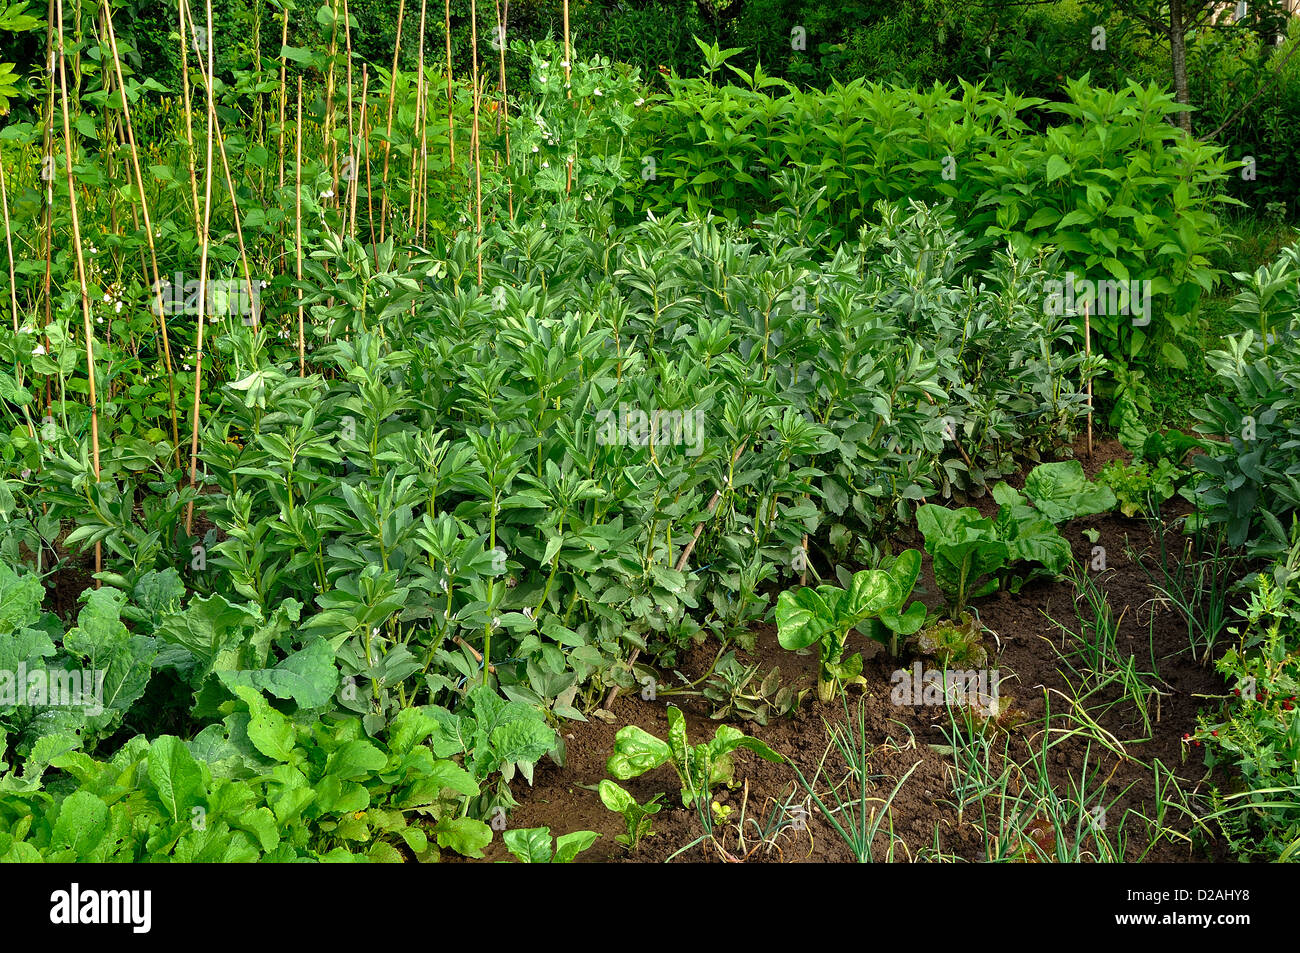 Vegetables plots : beets, broad beans (Vicia faba), peas with bamboo canes, Jerusalem artichoke, in june. Stock Photo